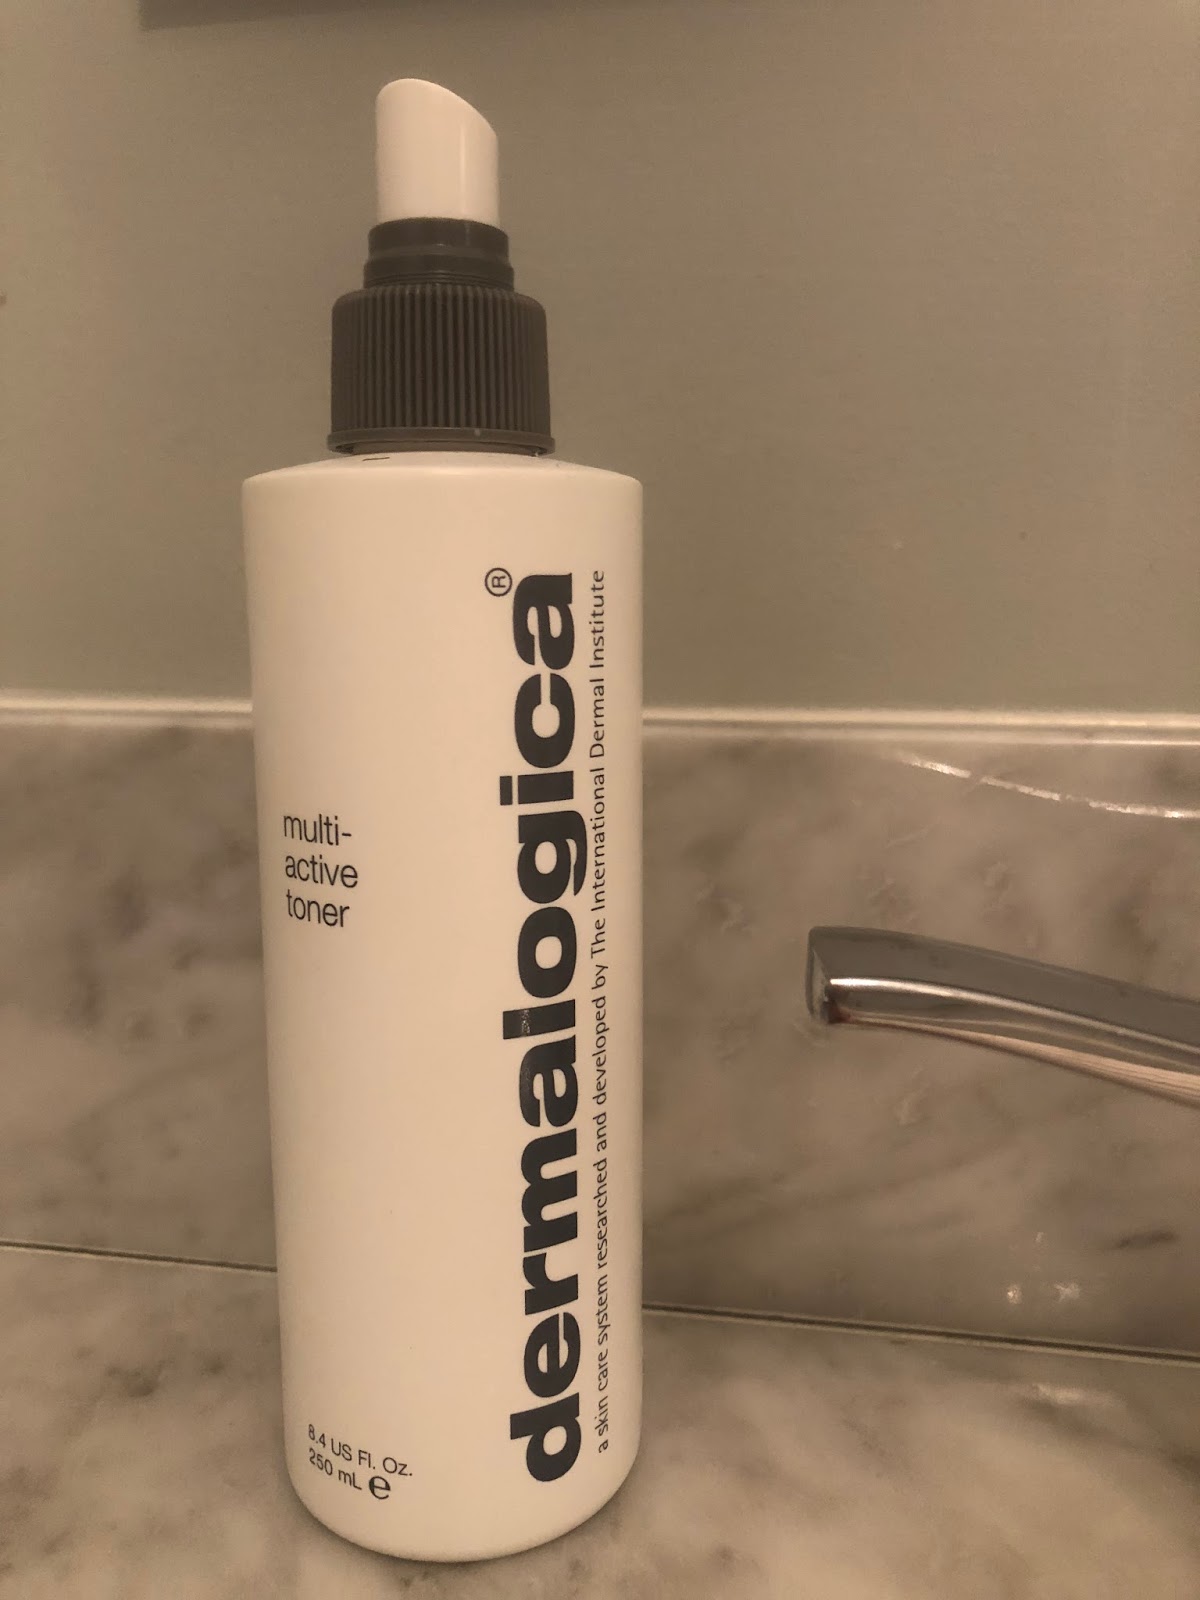 Product Review Time- NeoCutis and Glytone | The Kate Brochu Blog